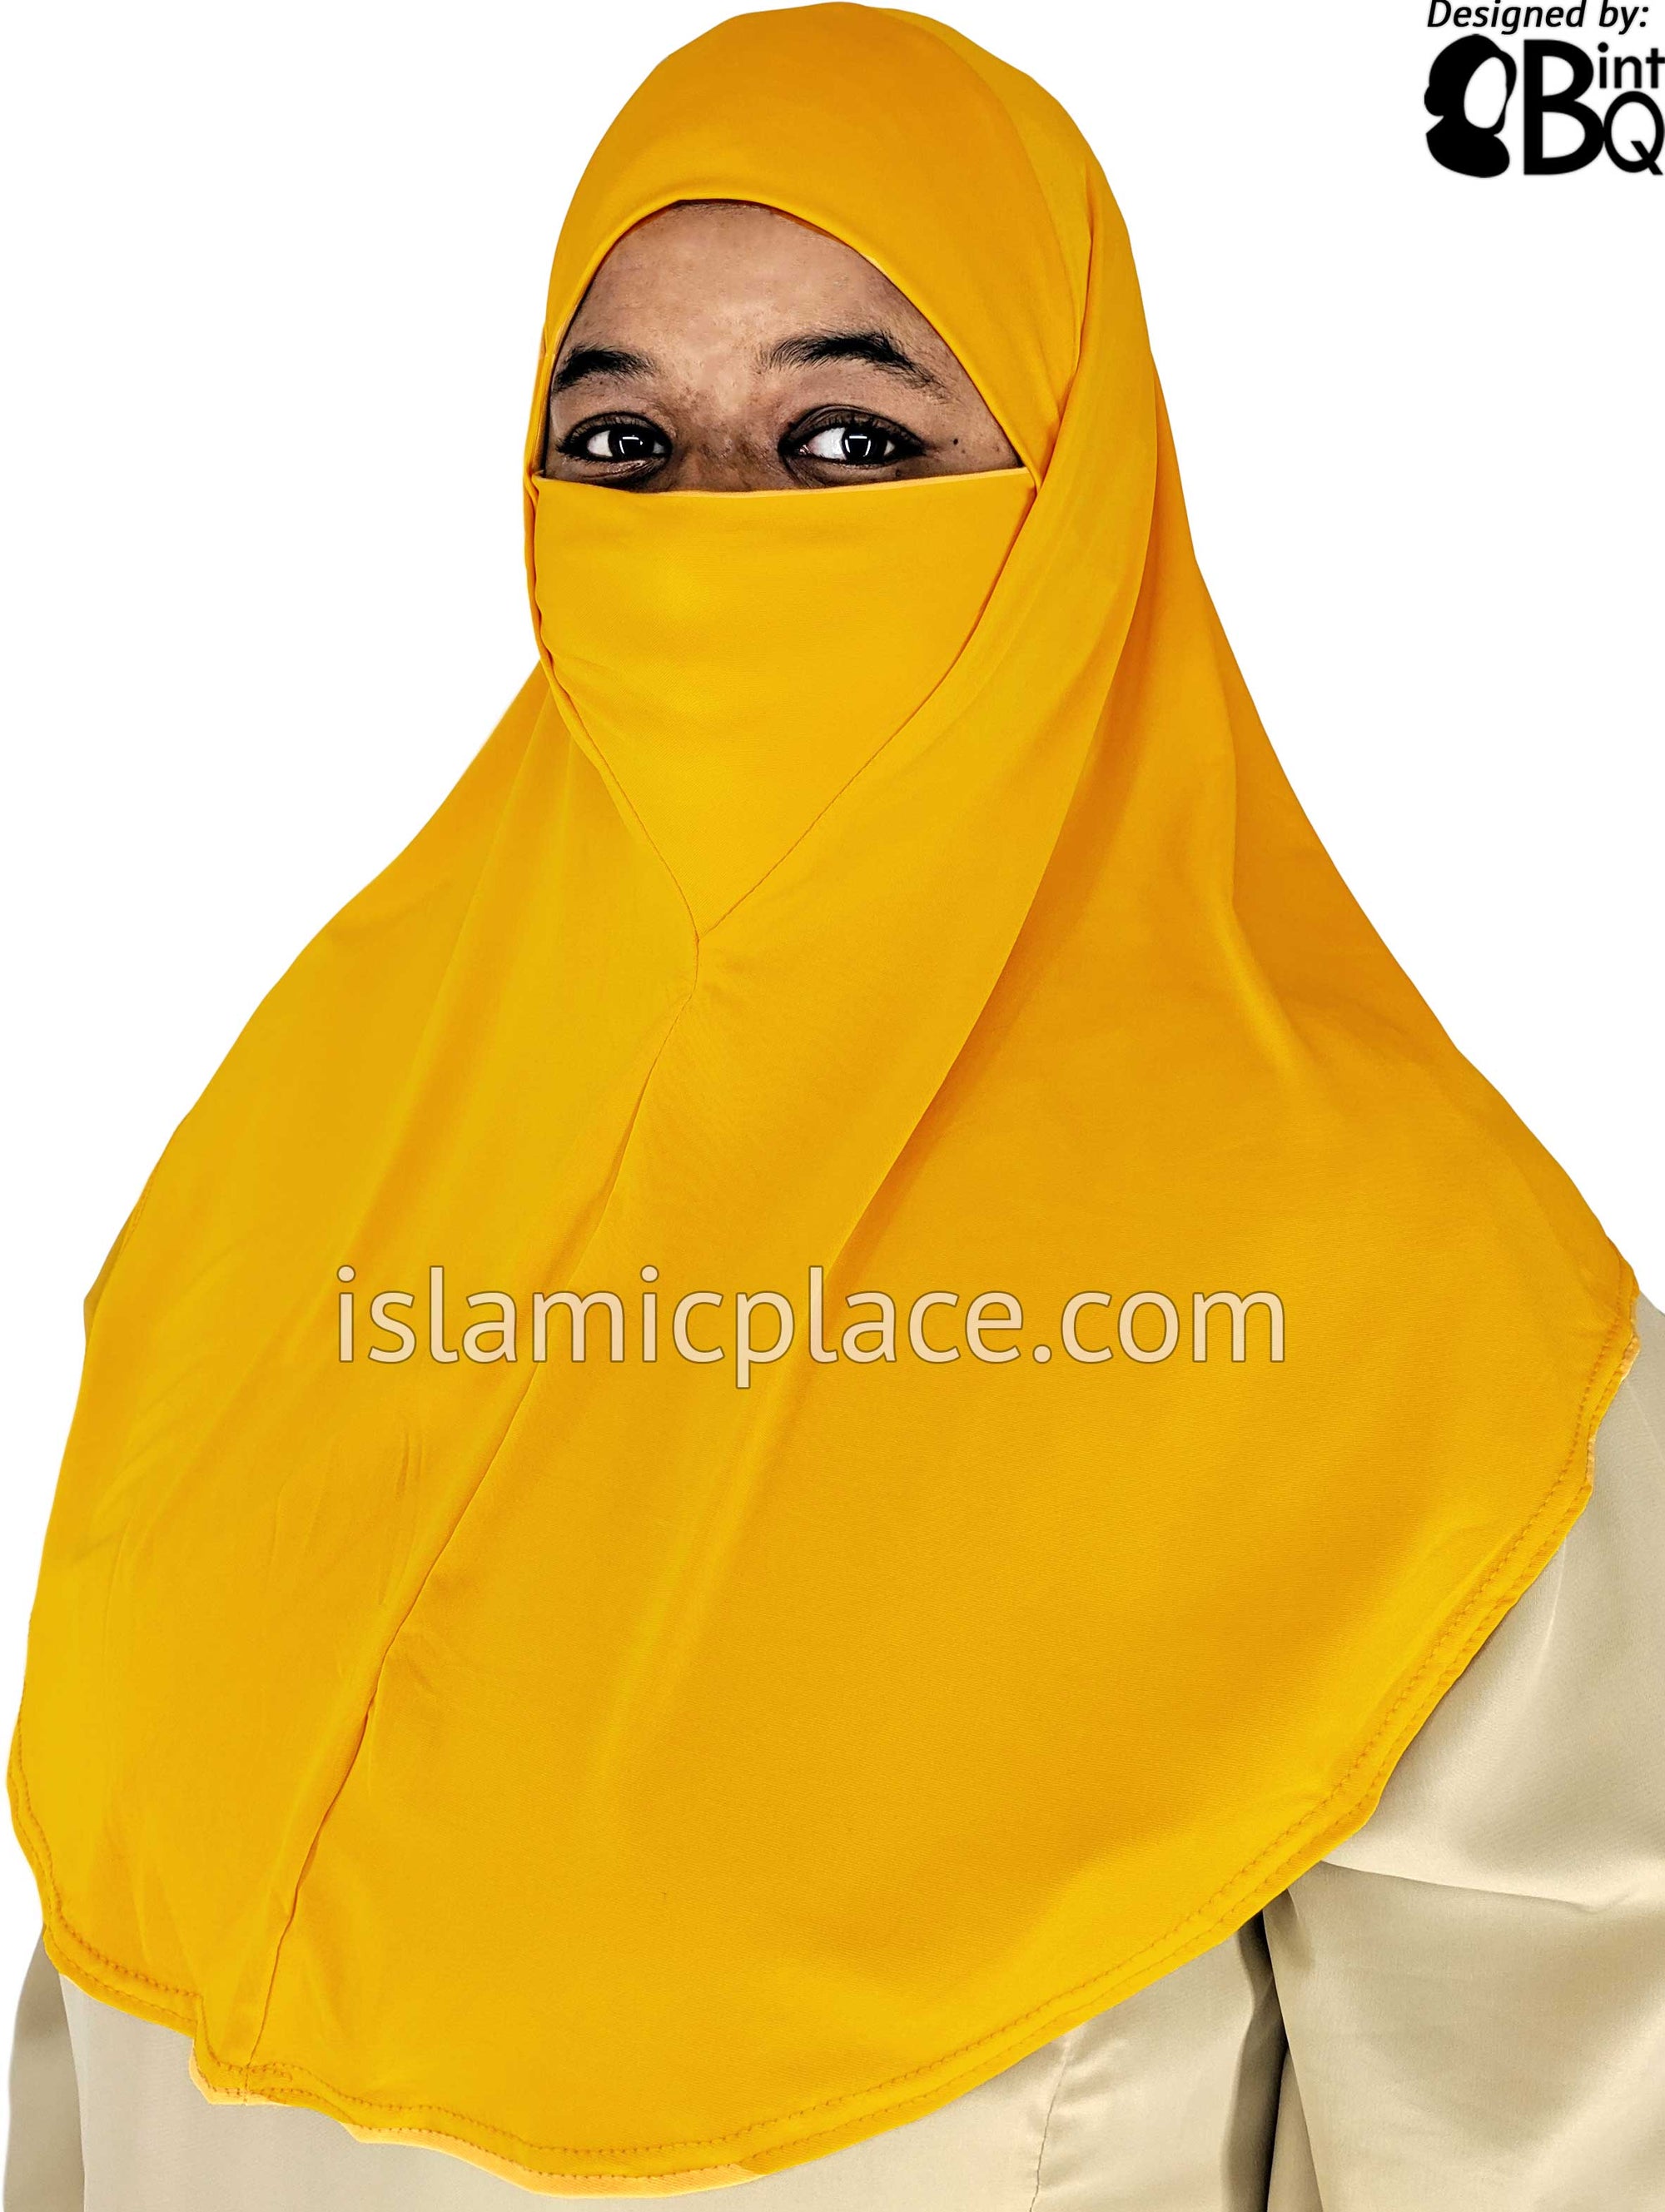 Golden Sand - Plain Teen to Adult (Large) Hijab Al-Amira with Built-in Niqab